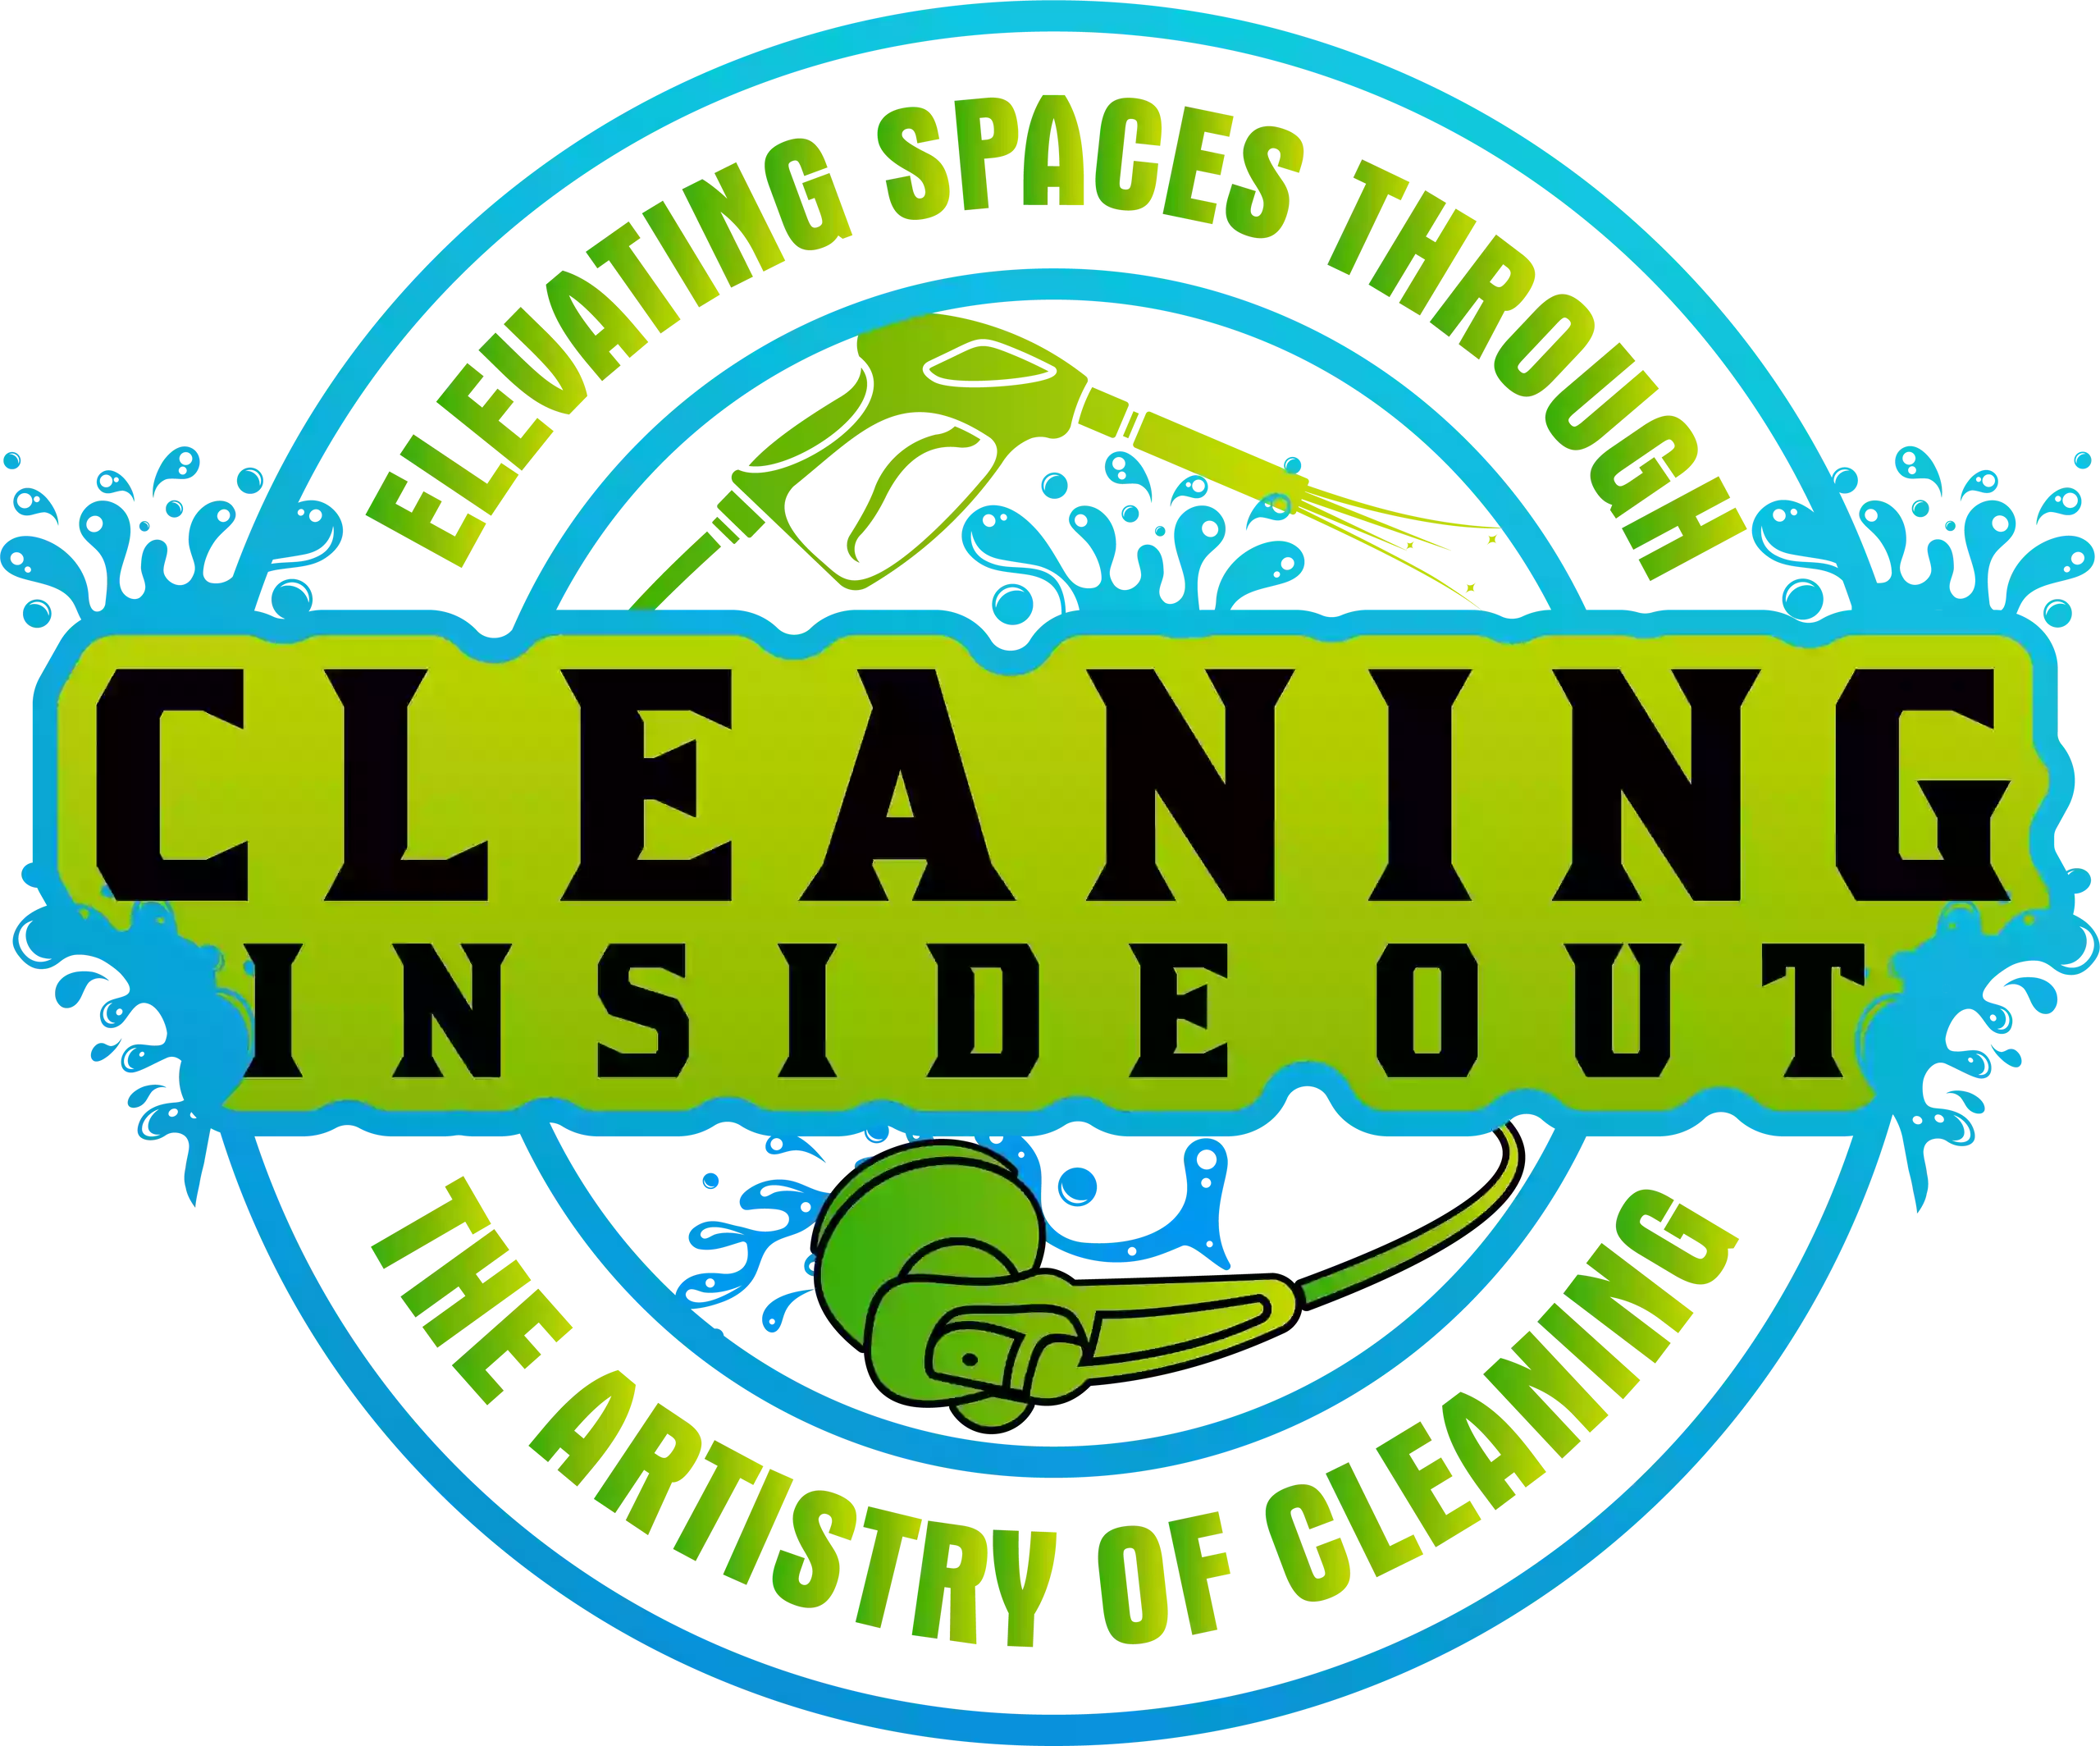 Cleaning Inside Out